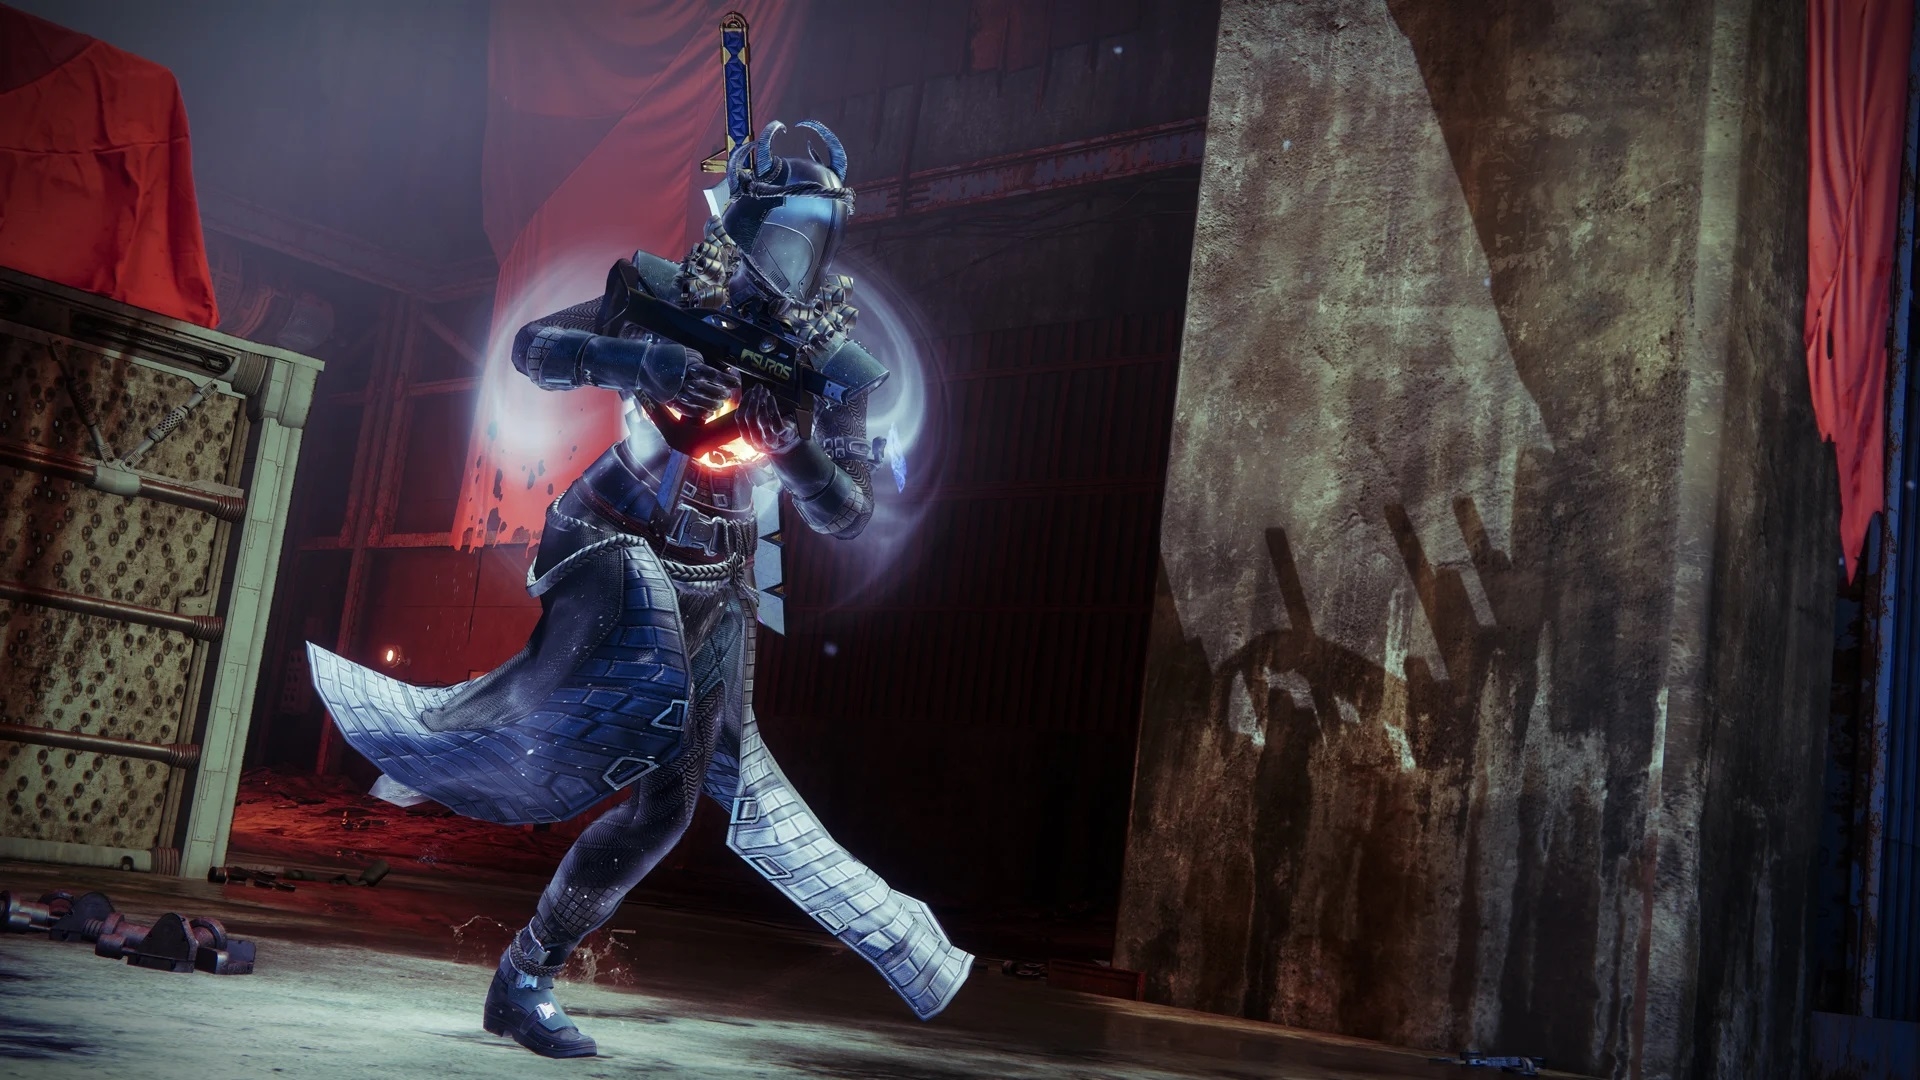 There are many new features and changes coming with the Destiny 2 Season 18 update, and we will be covering all there is to know about it.